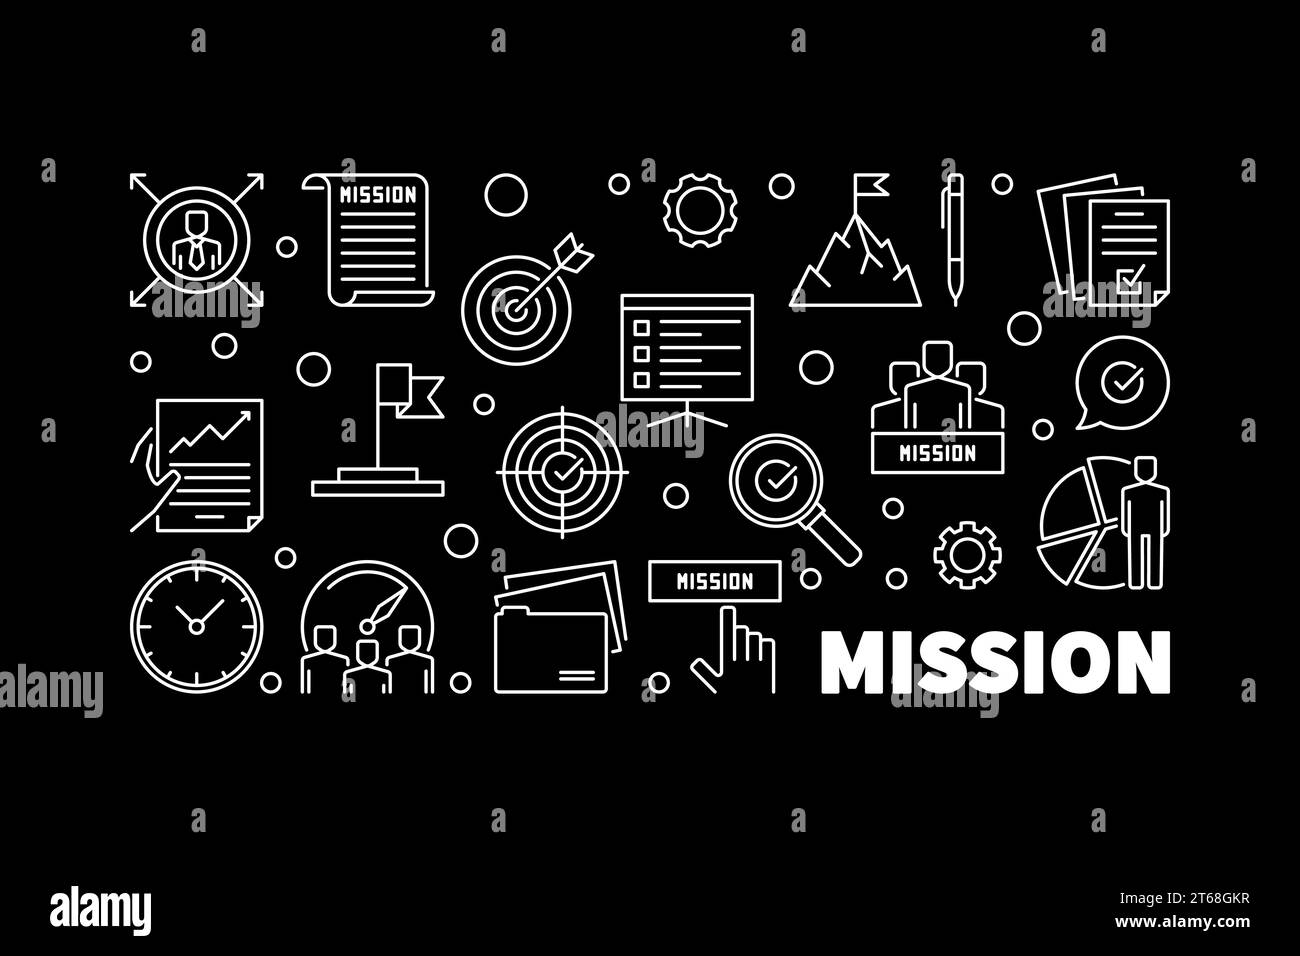 Mission Statement horizontal banner in thin line style - vector concept illustration on dark background Stock Vector